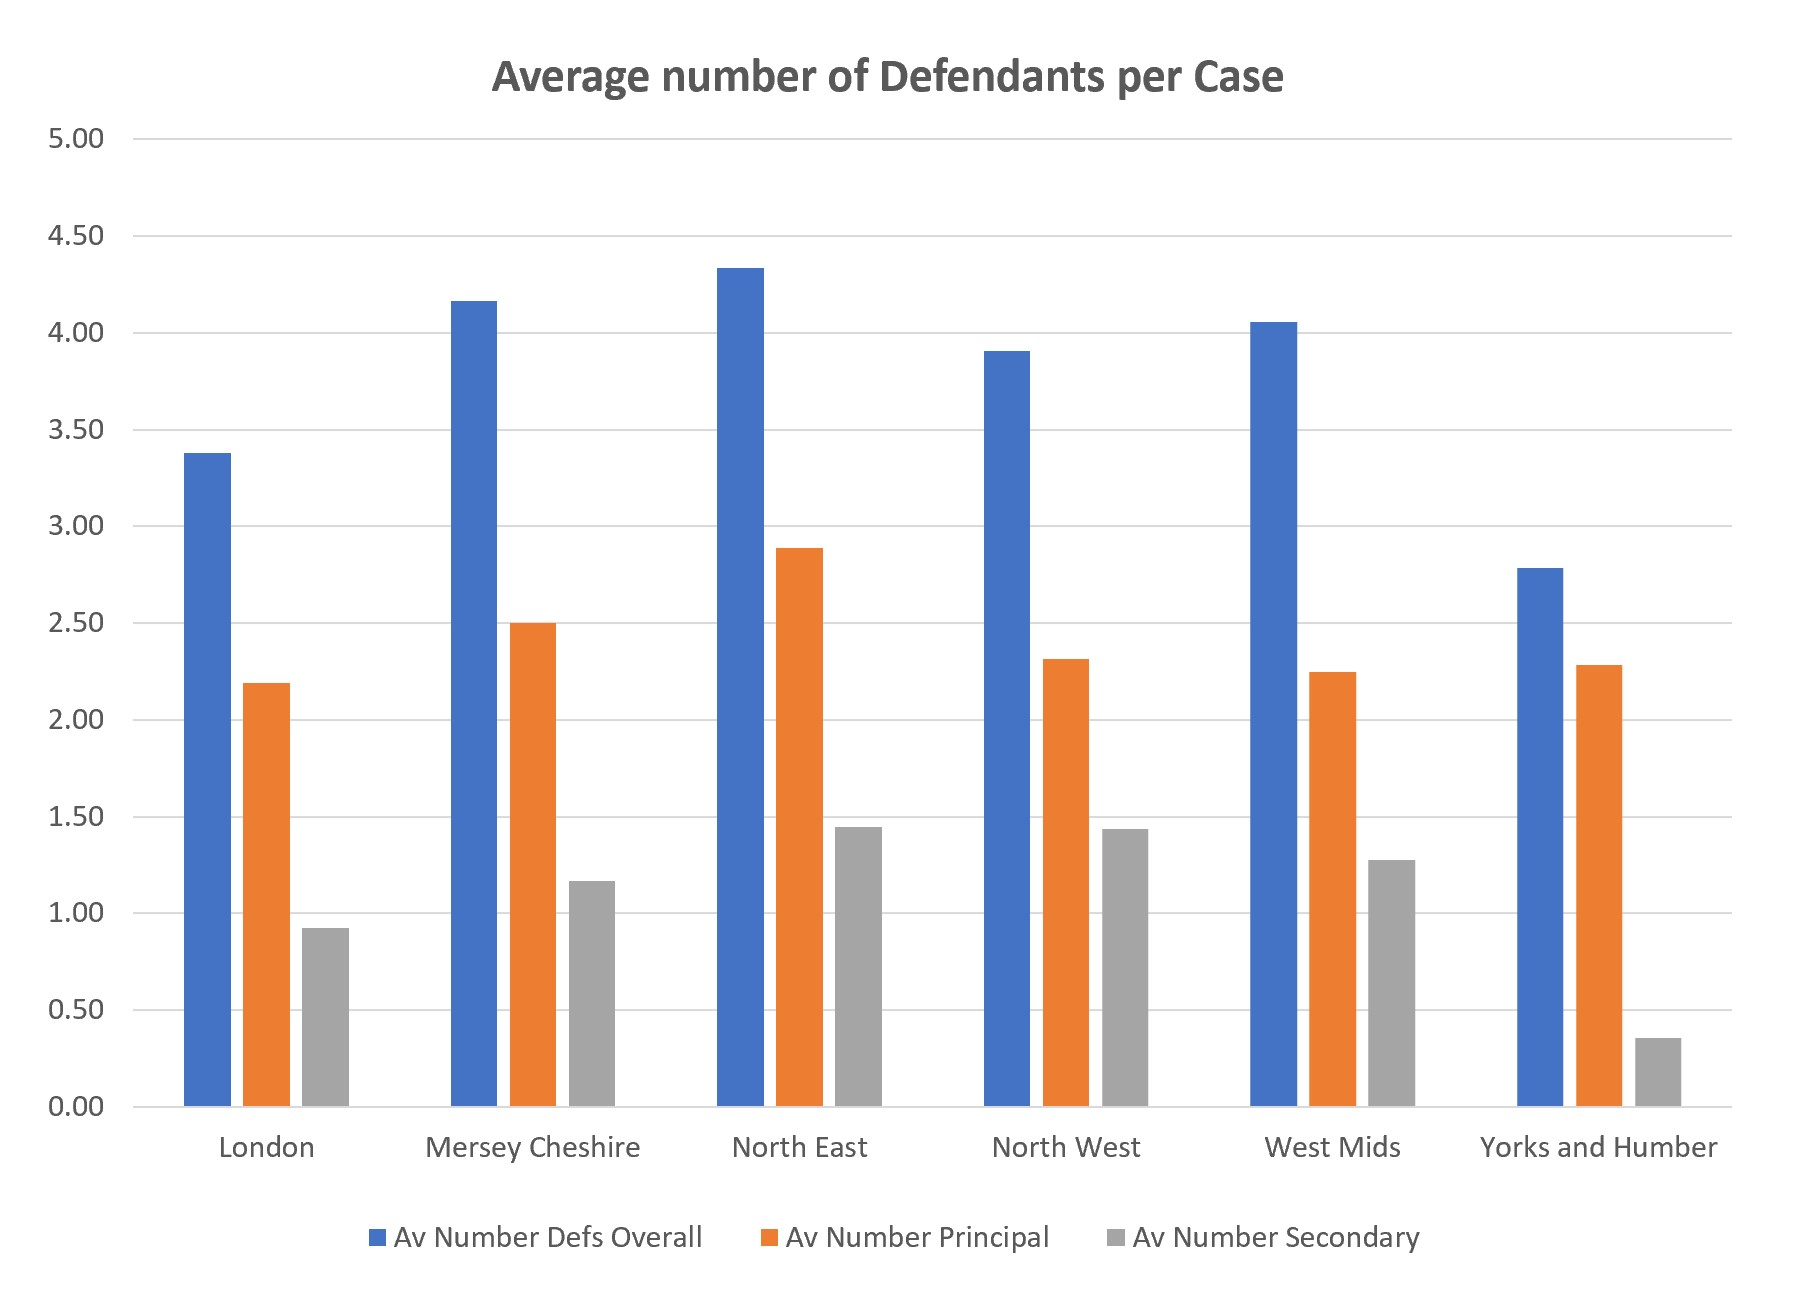 Graph showing the average number of defendants per case by CPS Area overall, the average number of principal edfendants and the average number of secondary defendants. The data relating to this graph can be found in the spreadsheets available on this page.